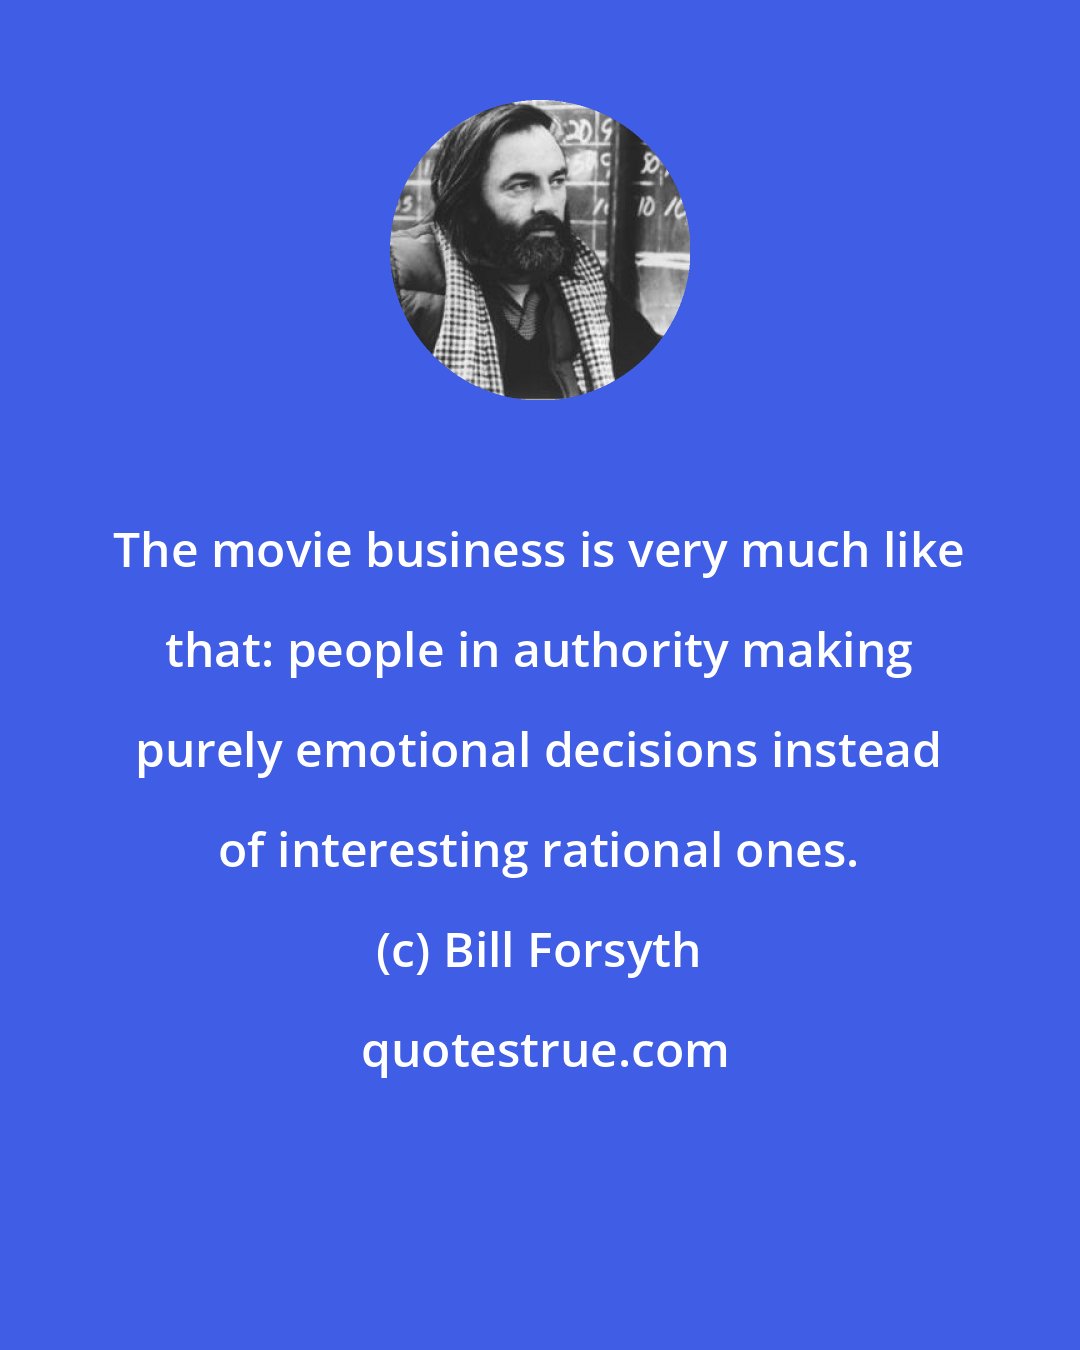 Bill Forsyth: The movie business is very much like that: people in authority making purely emotional decisions instead of interesting rational ones.